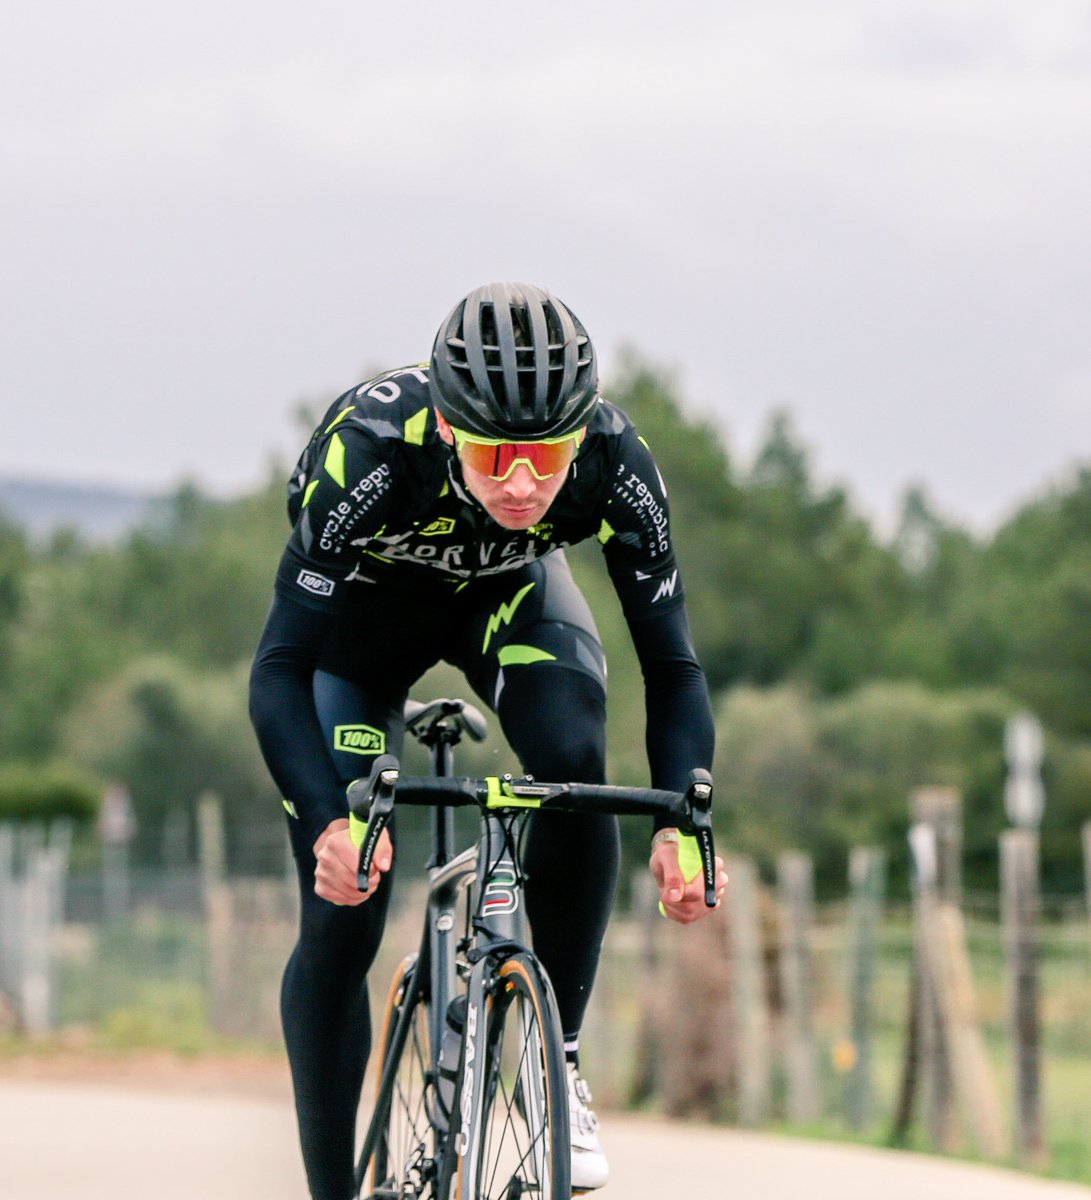 Excited to be working with Morvelo Basso rider @JakeYarranton again for 2018 season.After a small injury setback in January,Jake has worked hard & is ready to kick start the season #bikeracing #coaching #progression #racing #bassobikes #morvelo #abus #morvelobasso @MorveloBassoRT